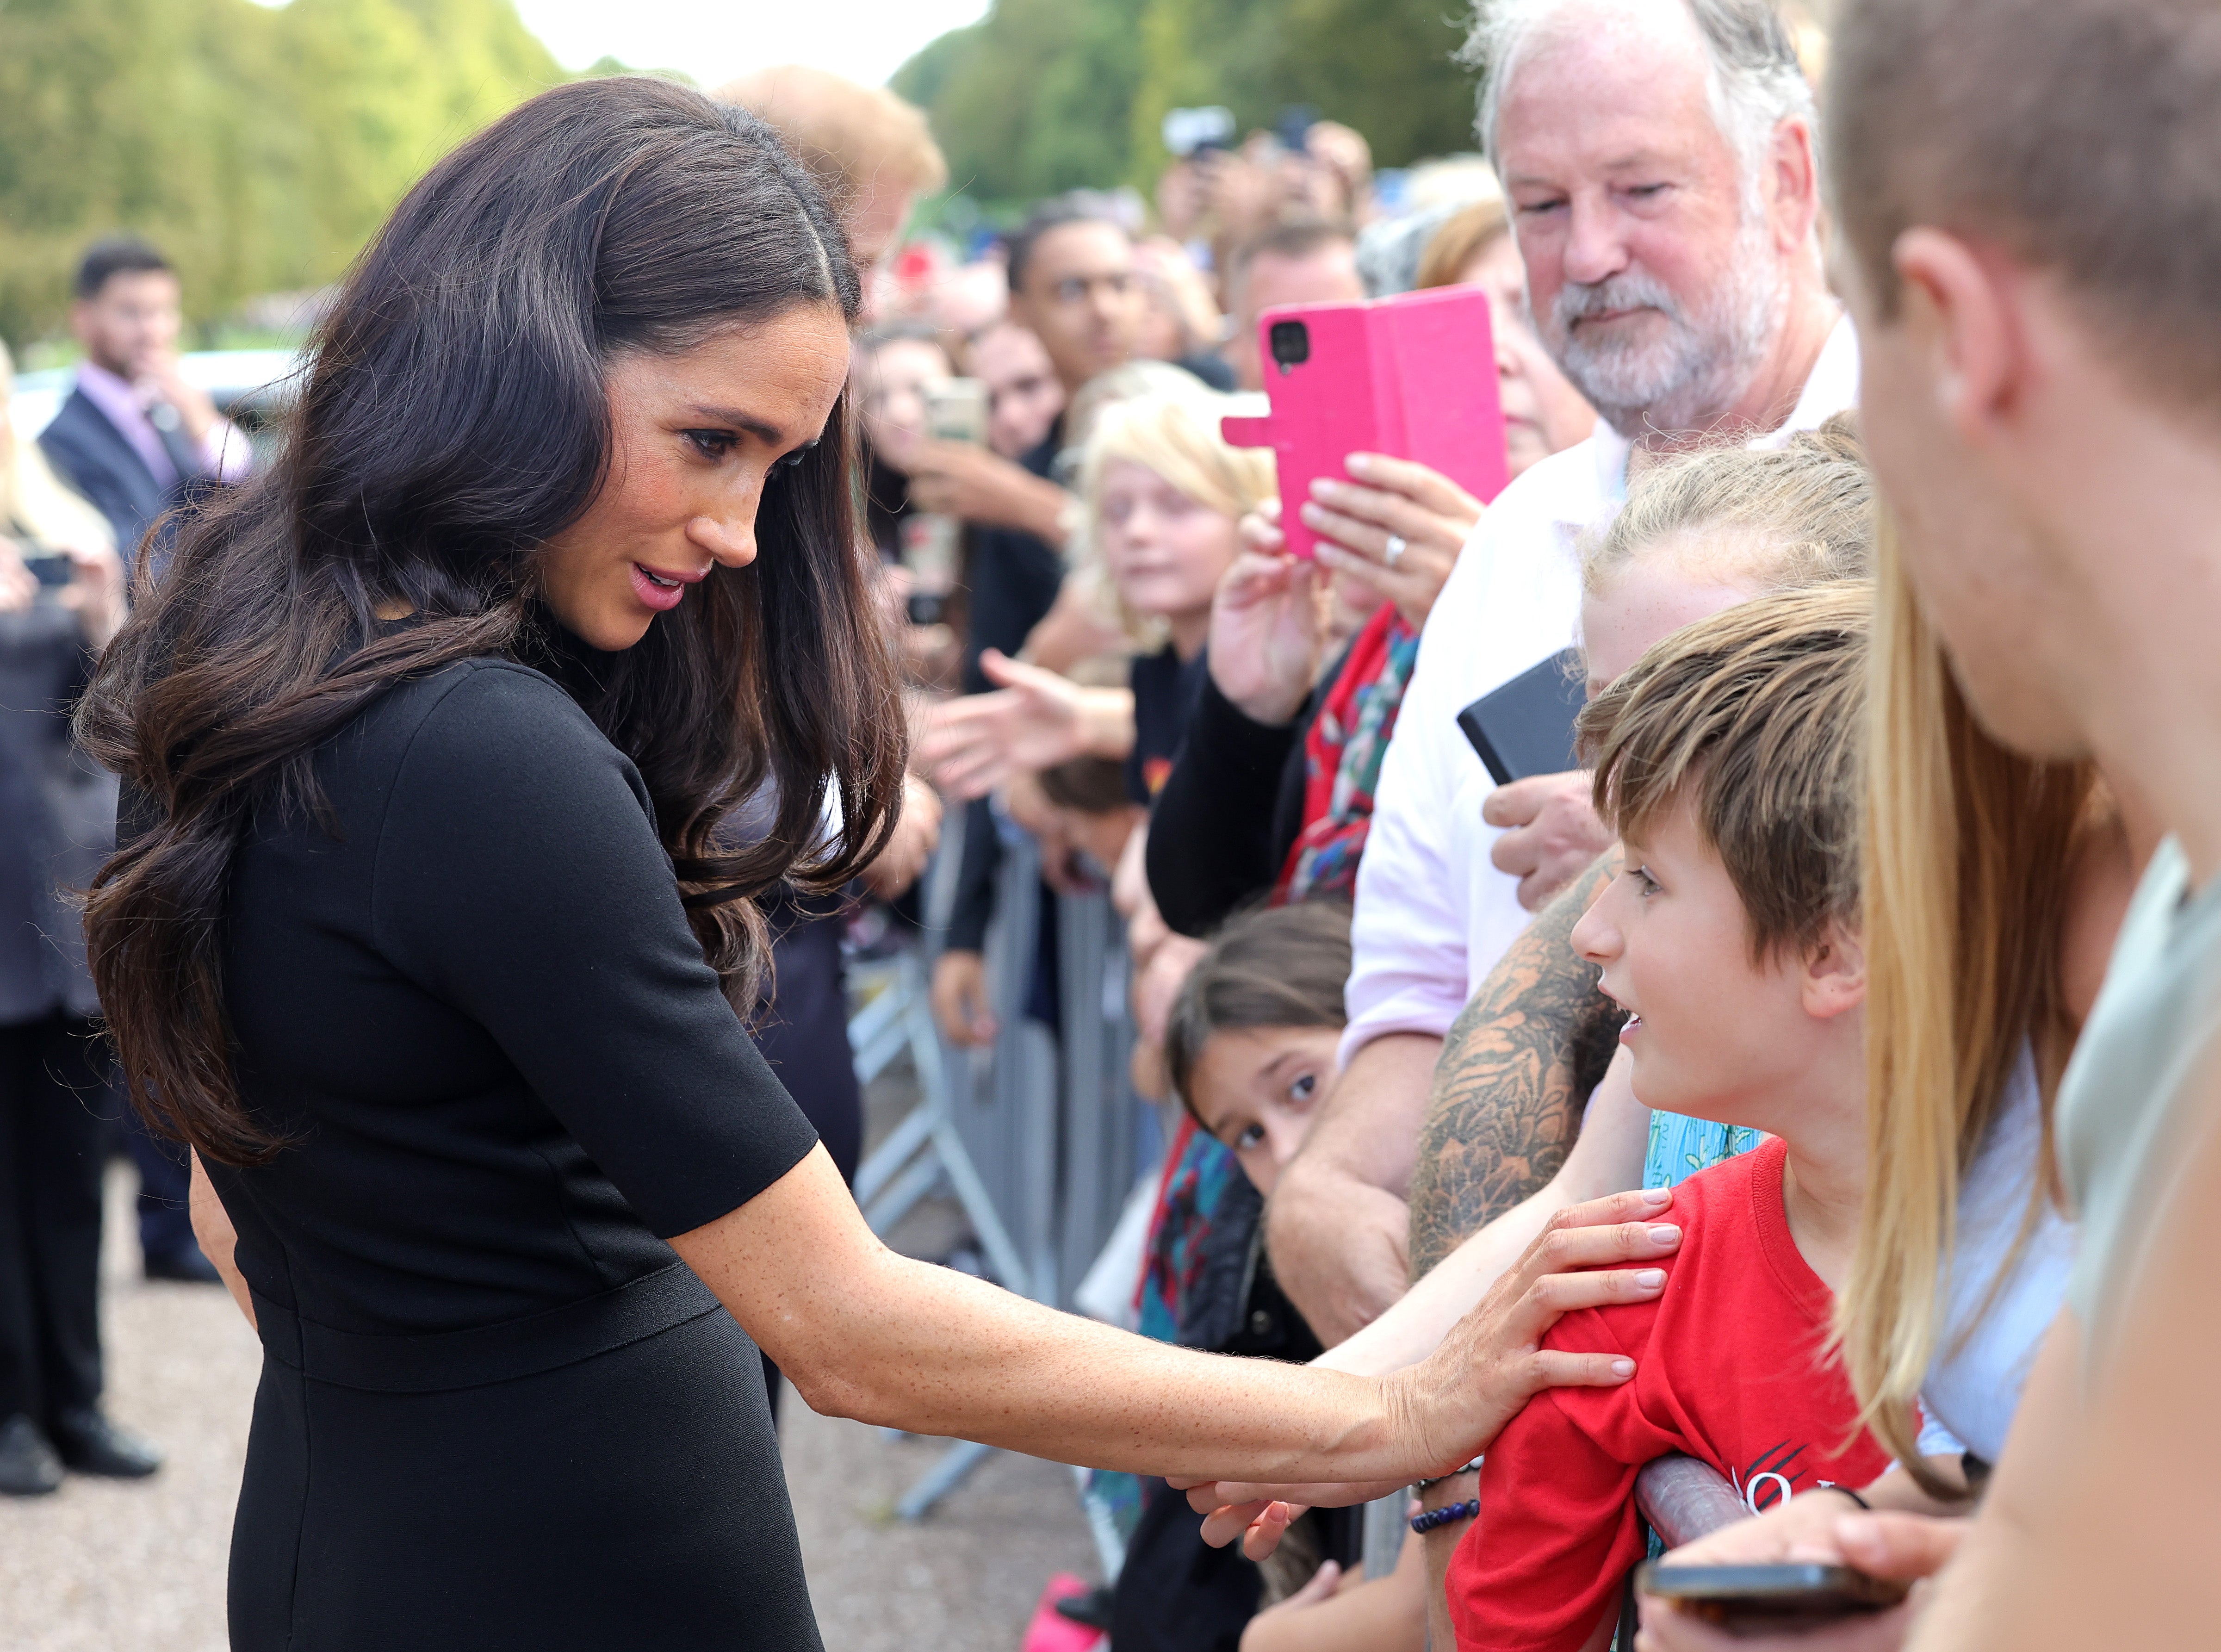 Meghan revealed she wished she could release emotion as easily as her children